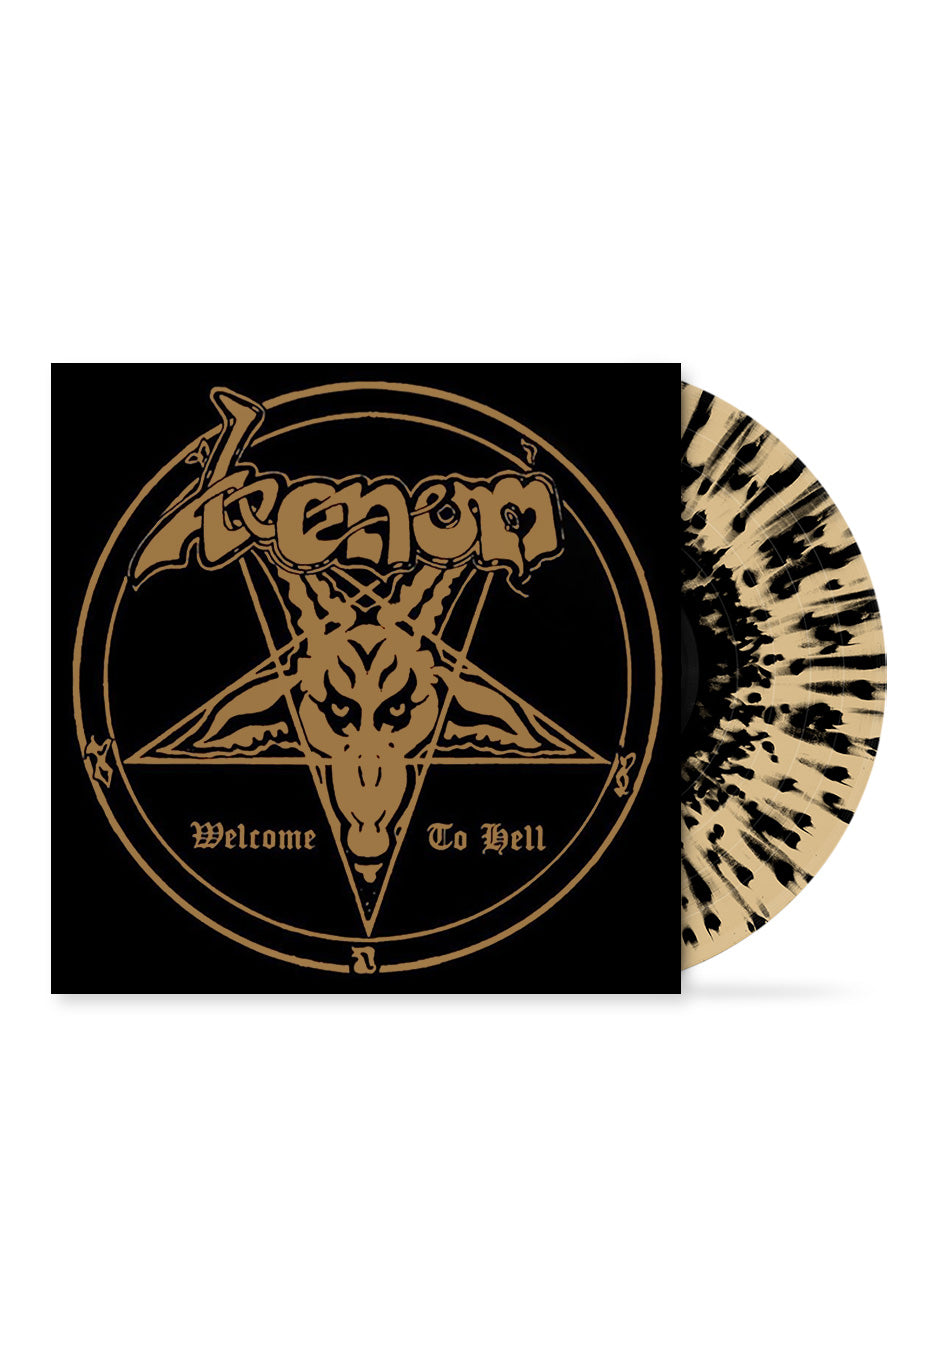 Venom - Welcome To Hell (40th Anniversary) Limited Edition - Splattered Vinyl